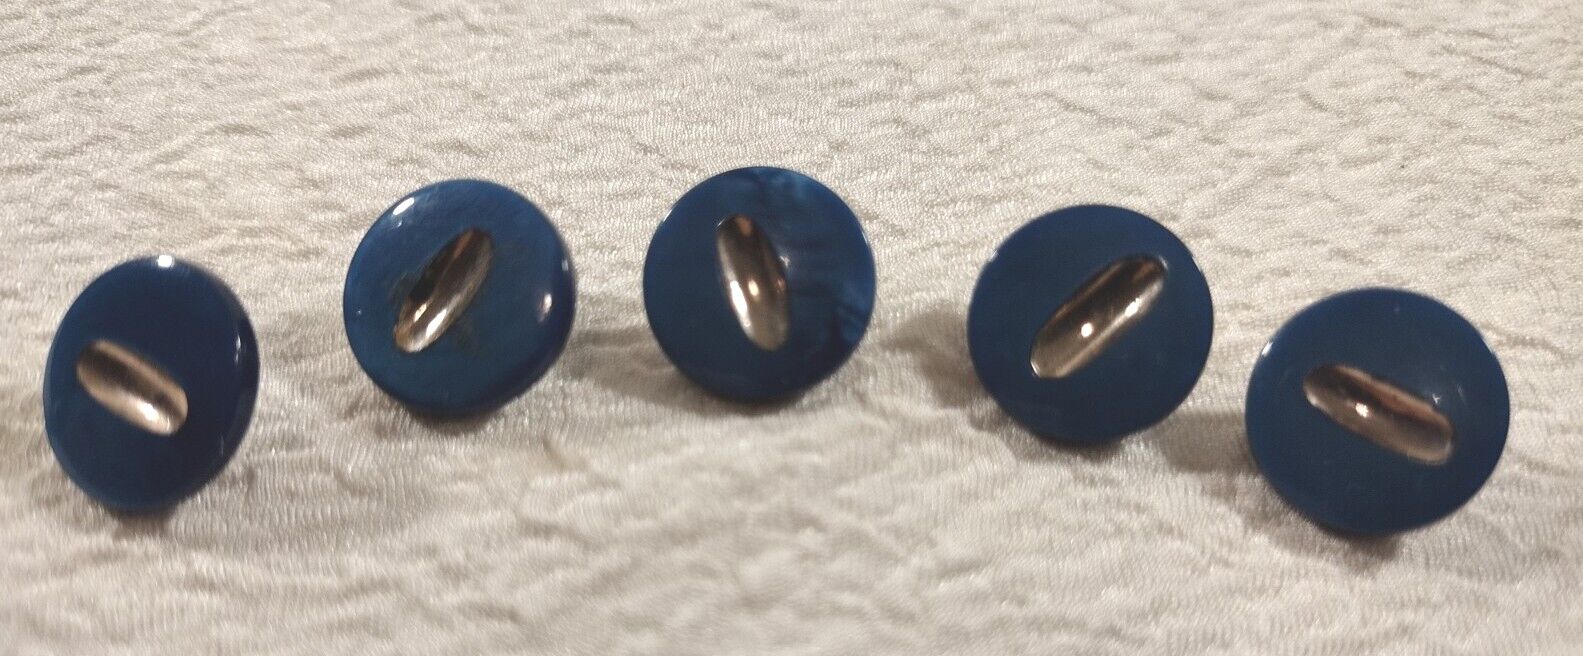 Lot 5 Vintage Round Pearlized or Lucite Blue & Brass Buttons Fashion Rare Beauty